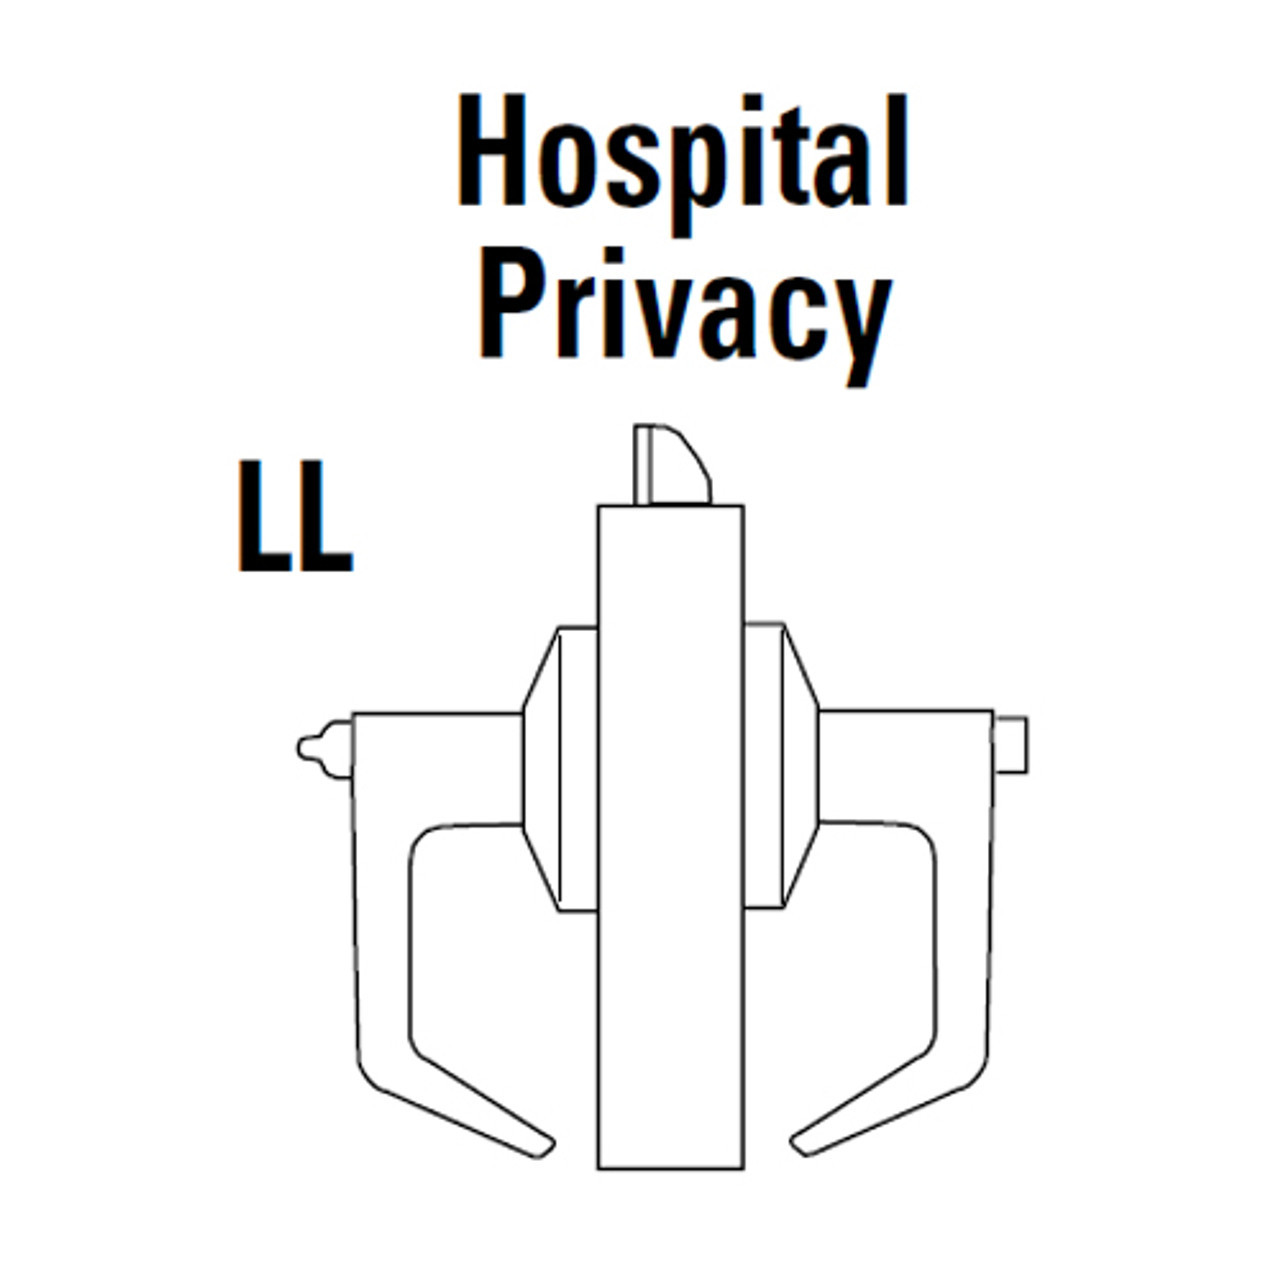 9K30LL15DS3619LM Best 9K Series Hospital Privacy Heavy Duty Cylindrical Lever Locks with Contour Angle with Return Lever Design in Satin Nickel